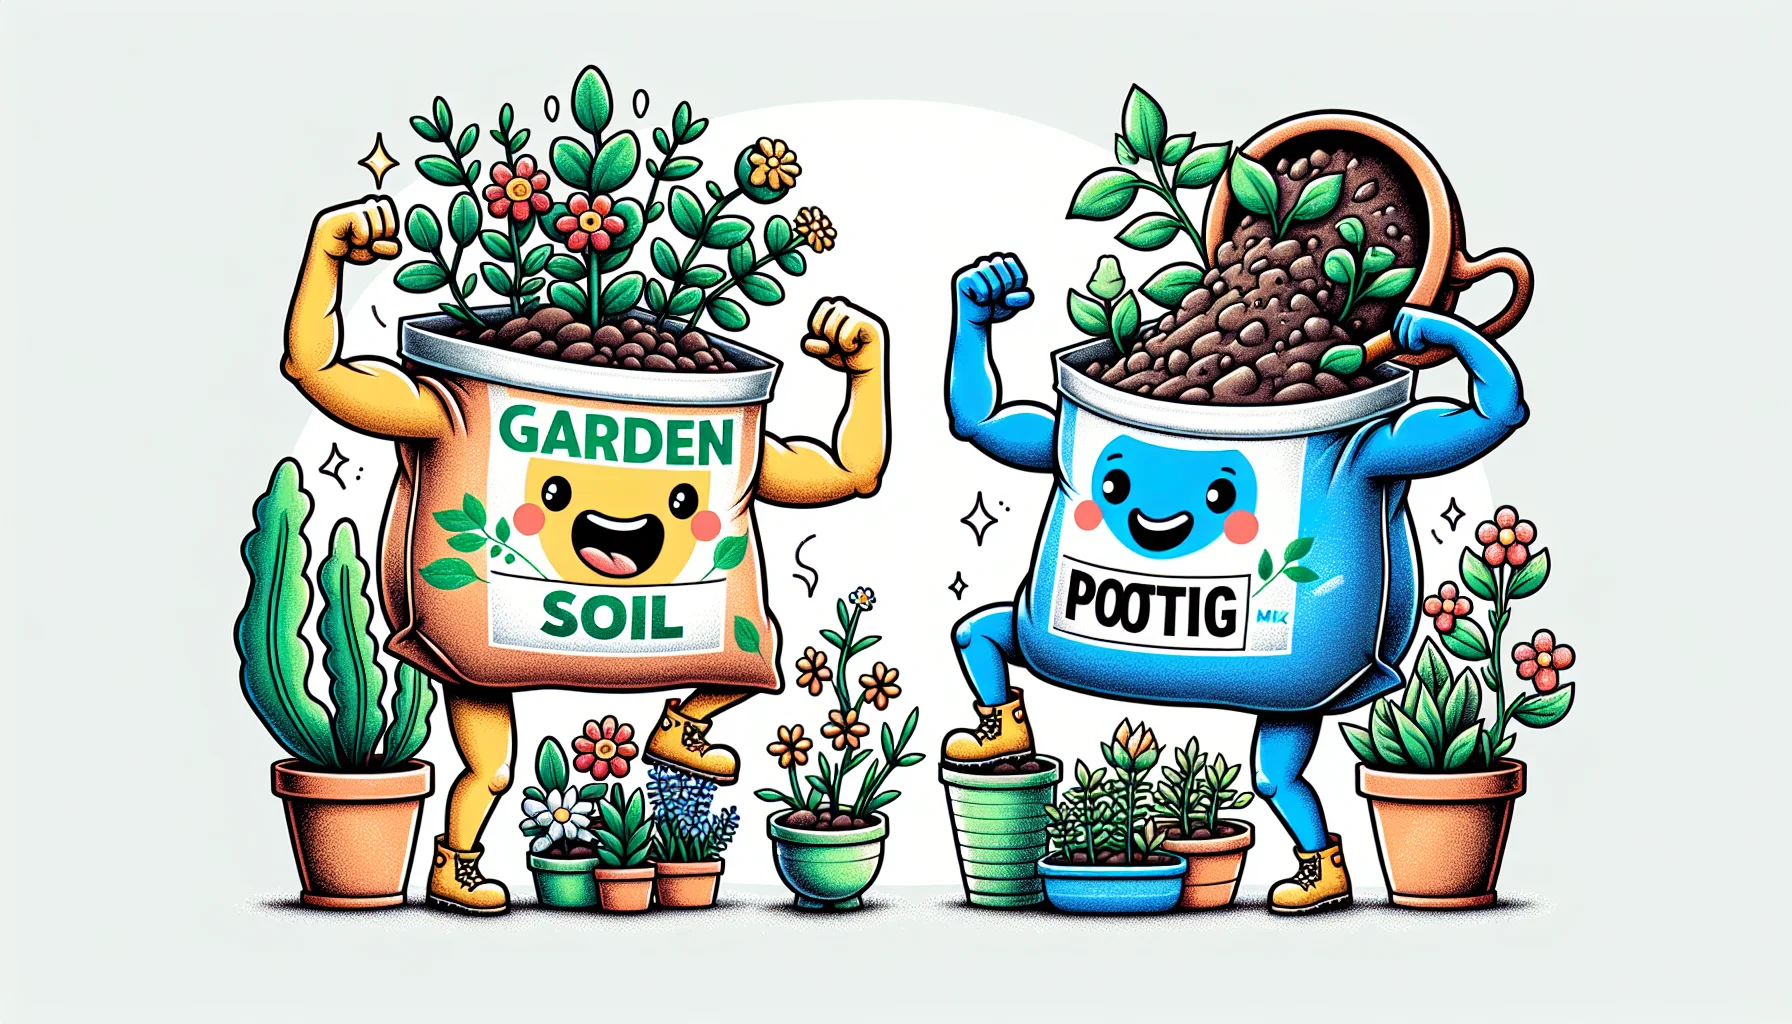 Create a detailed and whimsical image that represents a friendly competition between a bag of garden soil and a bag of potting mix. The bags are personified with joyful faces and waving hands in a garden setting. The garden soil bag flexes its strength, demonstrating its ability to boost outdoor plants. On the other hand, the potting mix bag is depicted nimbly potting an indoor plant while balancing on a flower pot. They are surrounded by happy, healthy plants, thus enticing viewers to explore the joy of gardening.